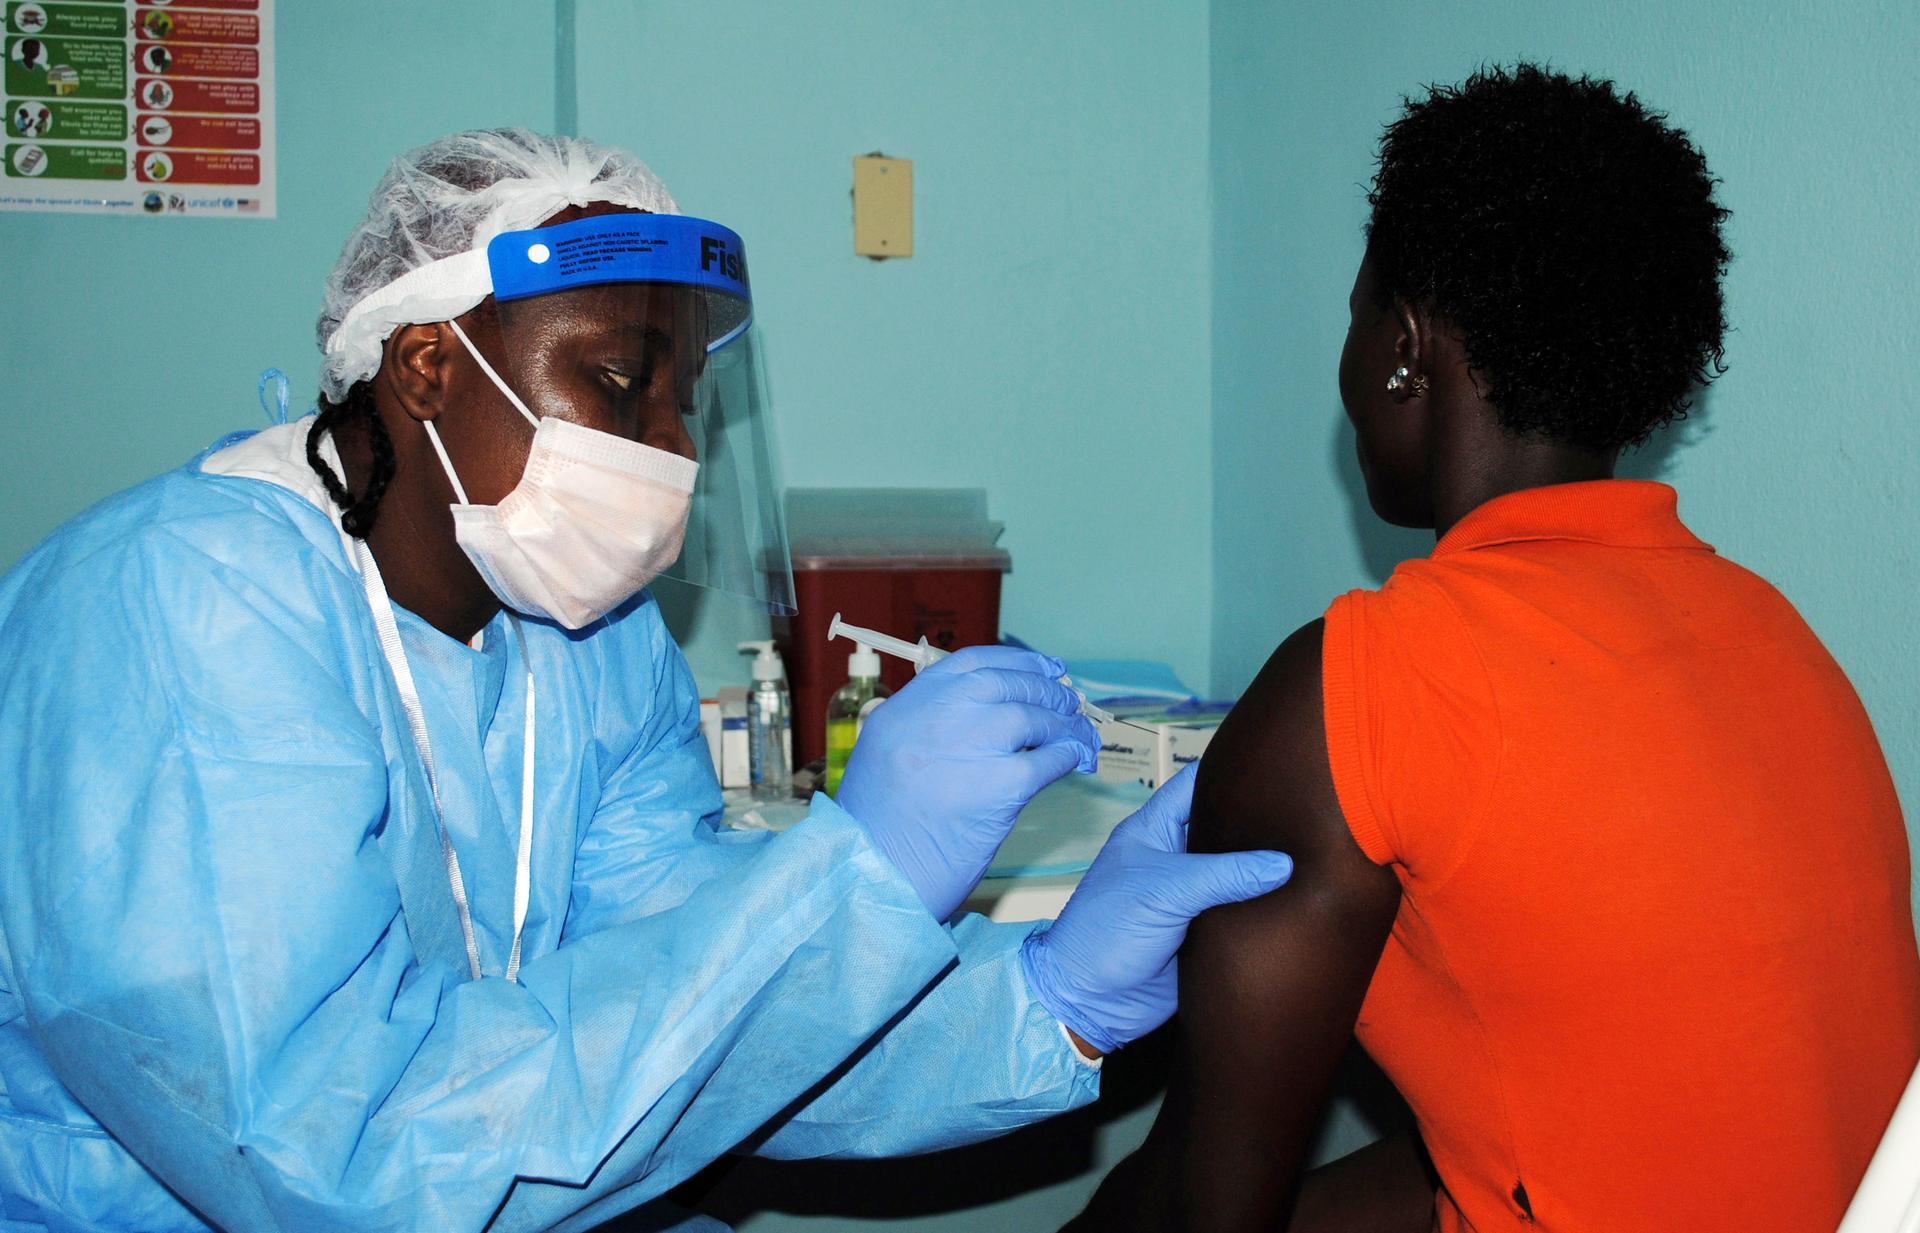 A health worker injects a woman with an Ebola vaccine during a trial in Liberia